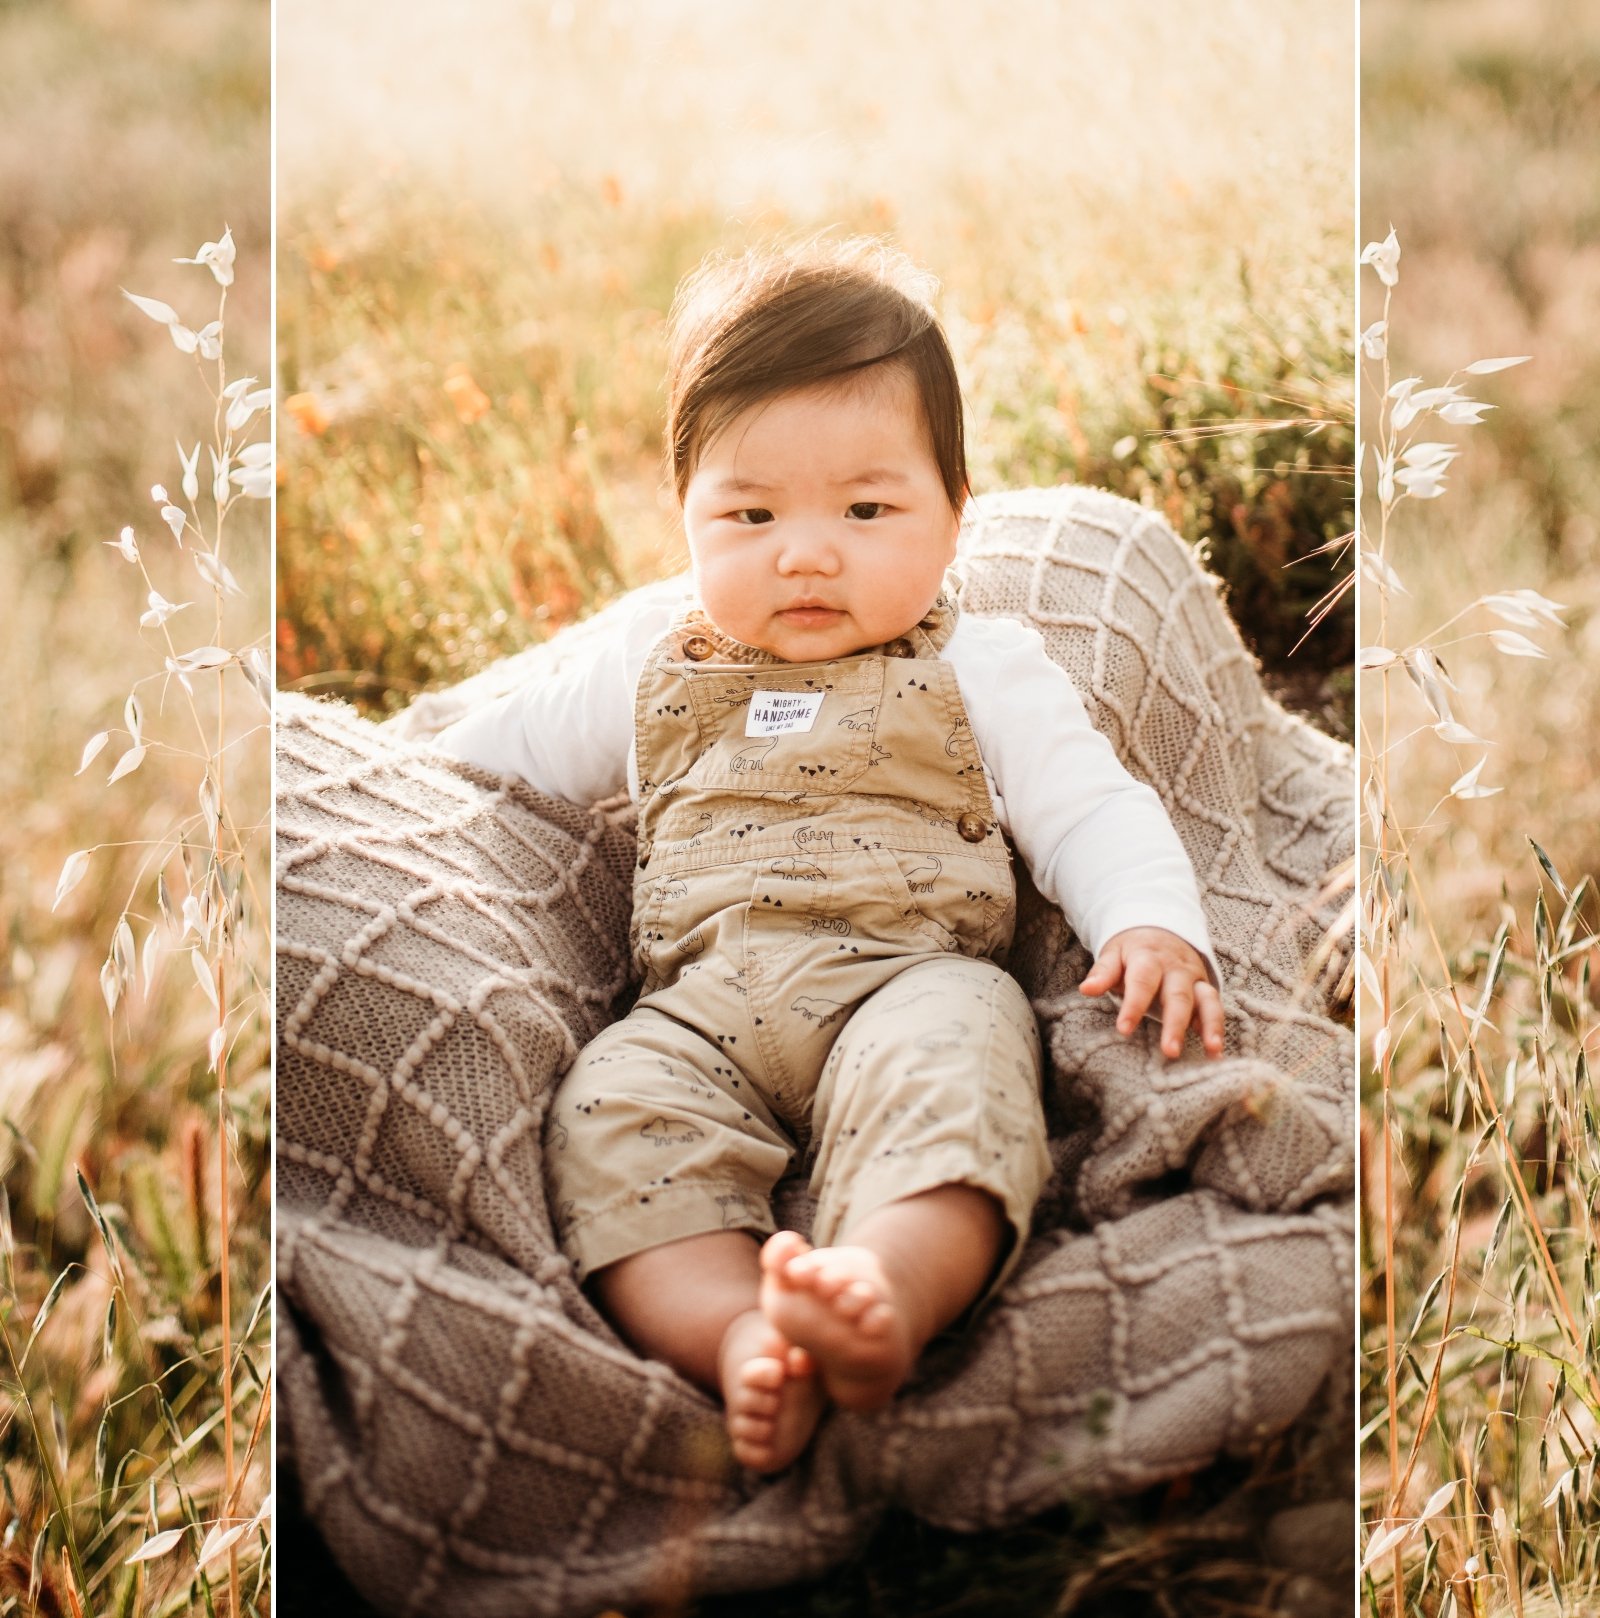 EAST BAY AREA FAMILY PHOTOGRAPHY SHELL RIDGE OPEN SPACE BABY LIFESTYLE PHOTOSHOOT  22.jpg